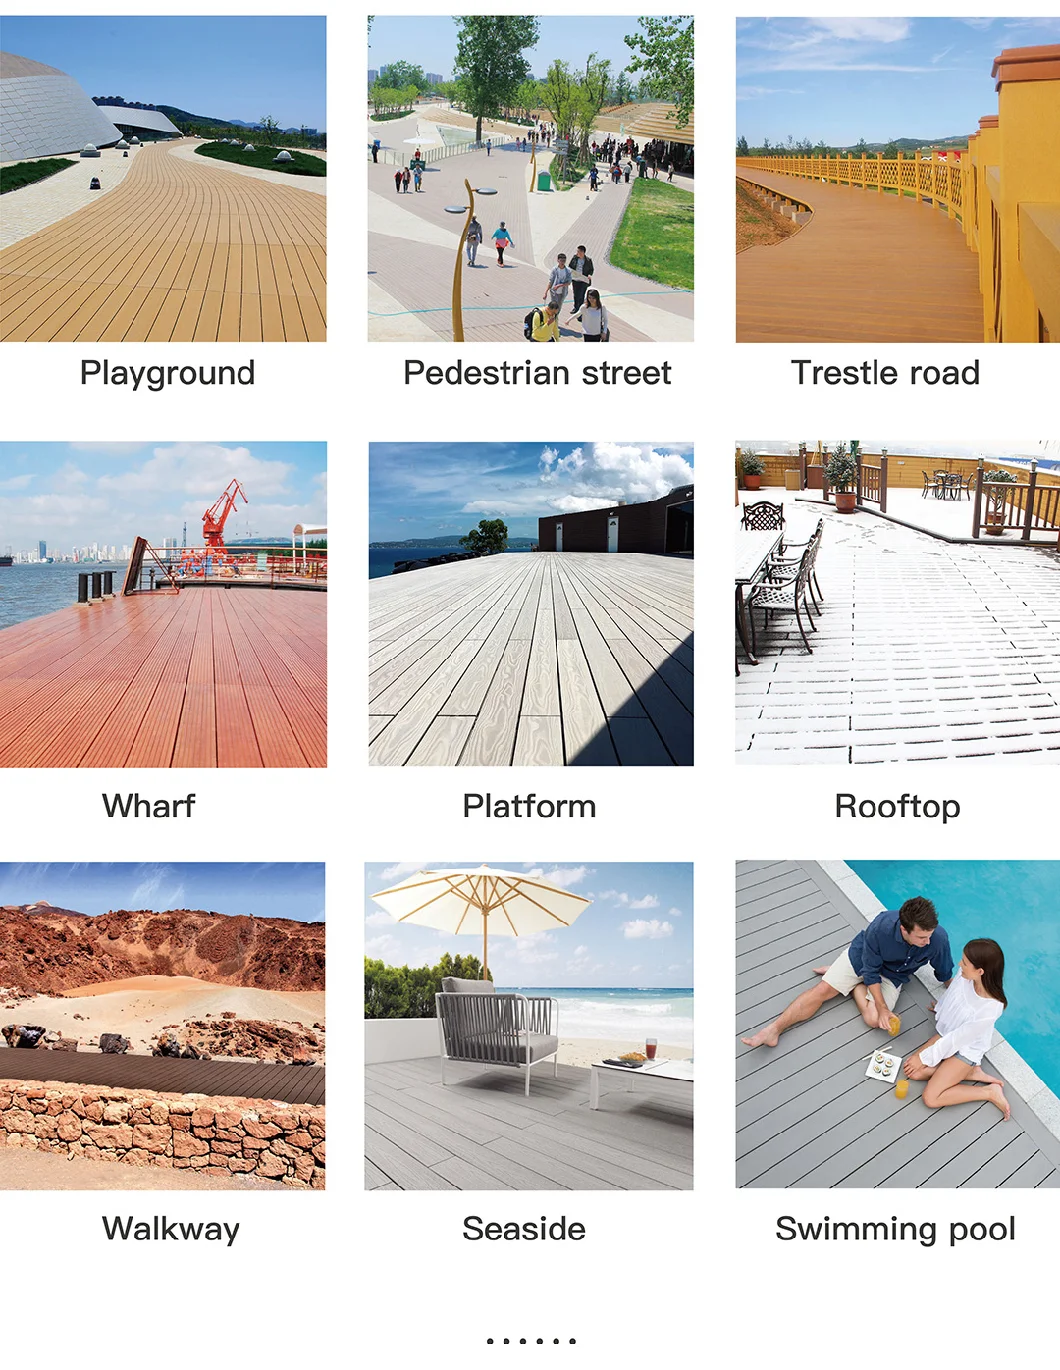 Co-04 Wood Plastic Composite, Hollow 3D Embossing WPC Co-Extrusion Decking China